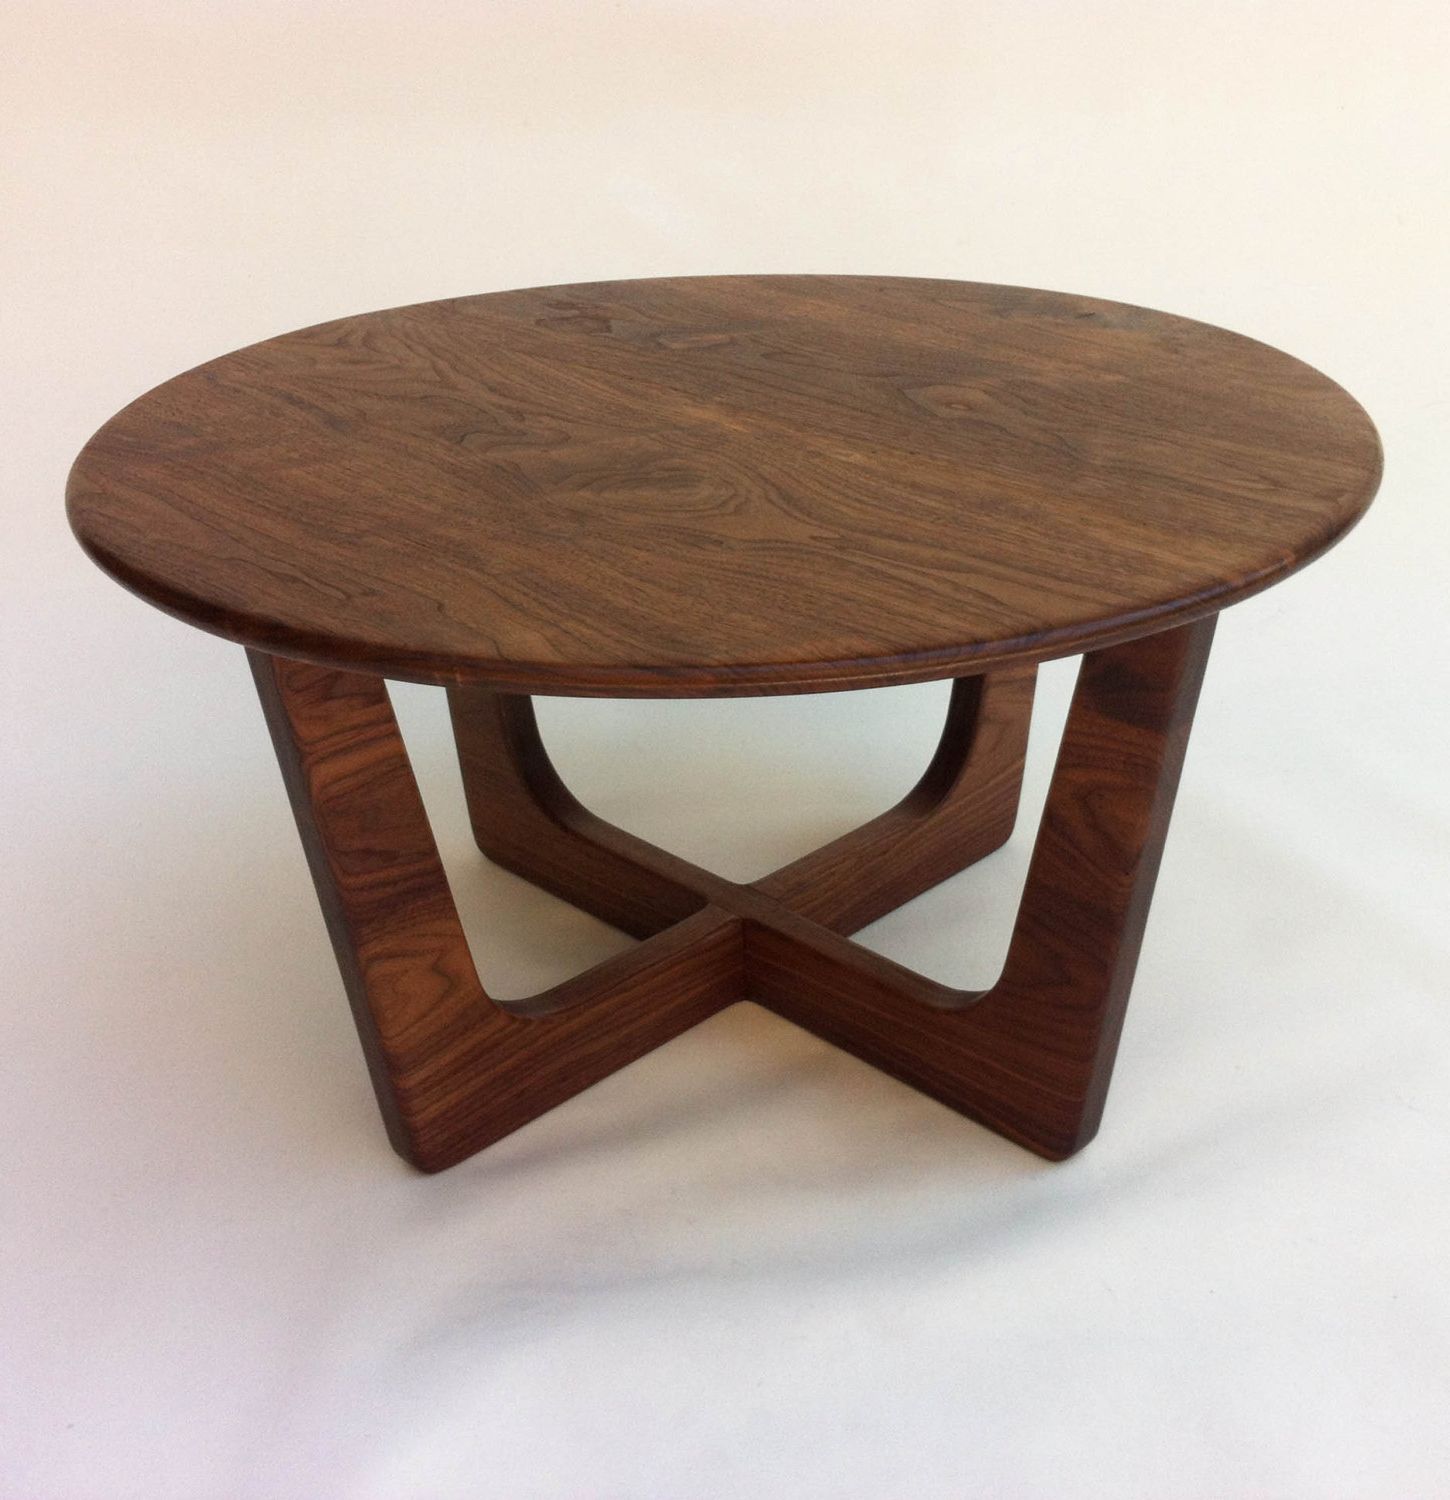 Walnut Coffee Tables Within Famous Solid Walnut Round Mid Century Modern Coffee Table (View 9 of 15)